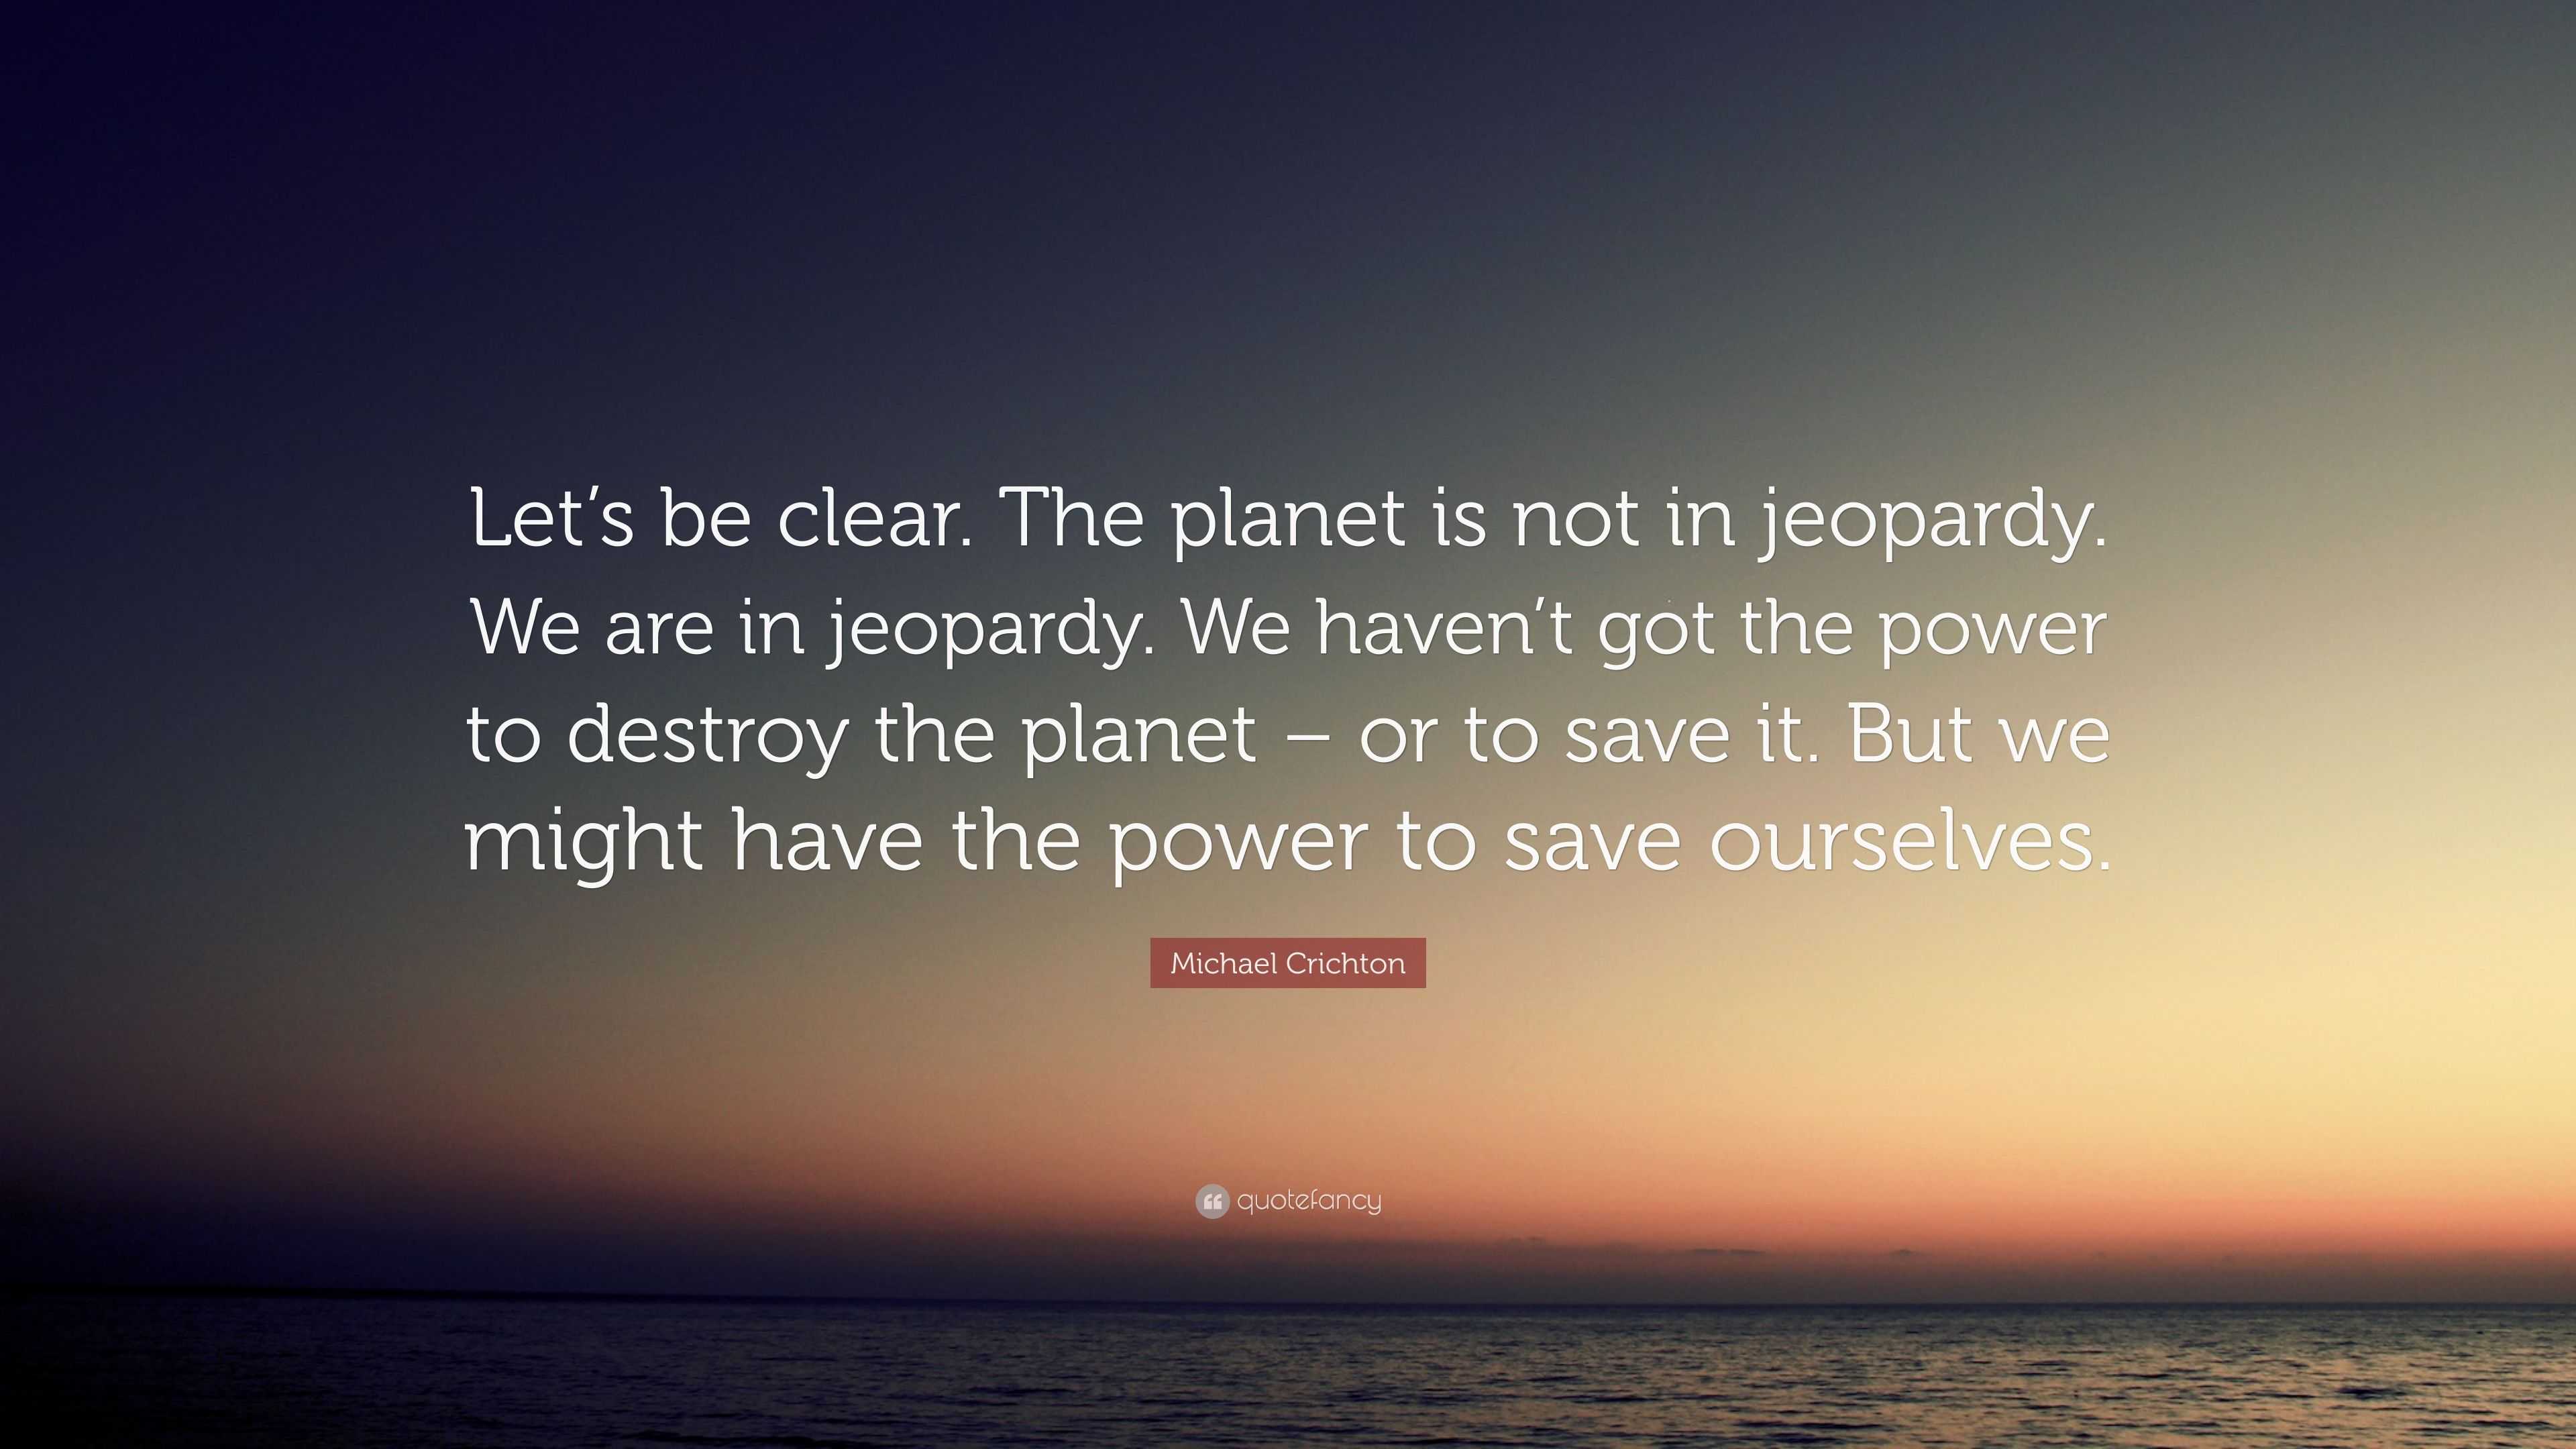 Michael Crichton Quote: “Let’s be clear. The planet is not in jeopardy ...